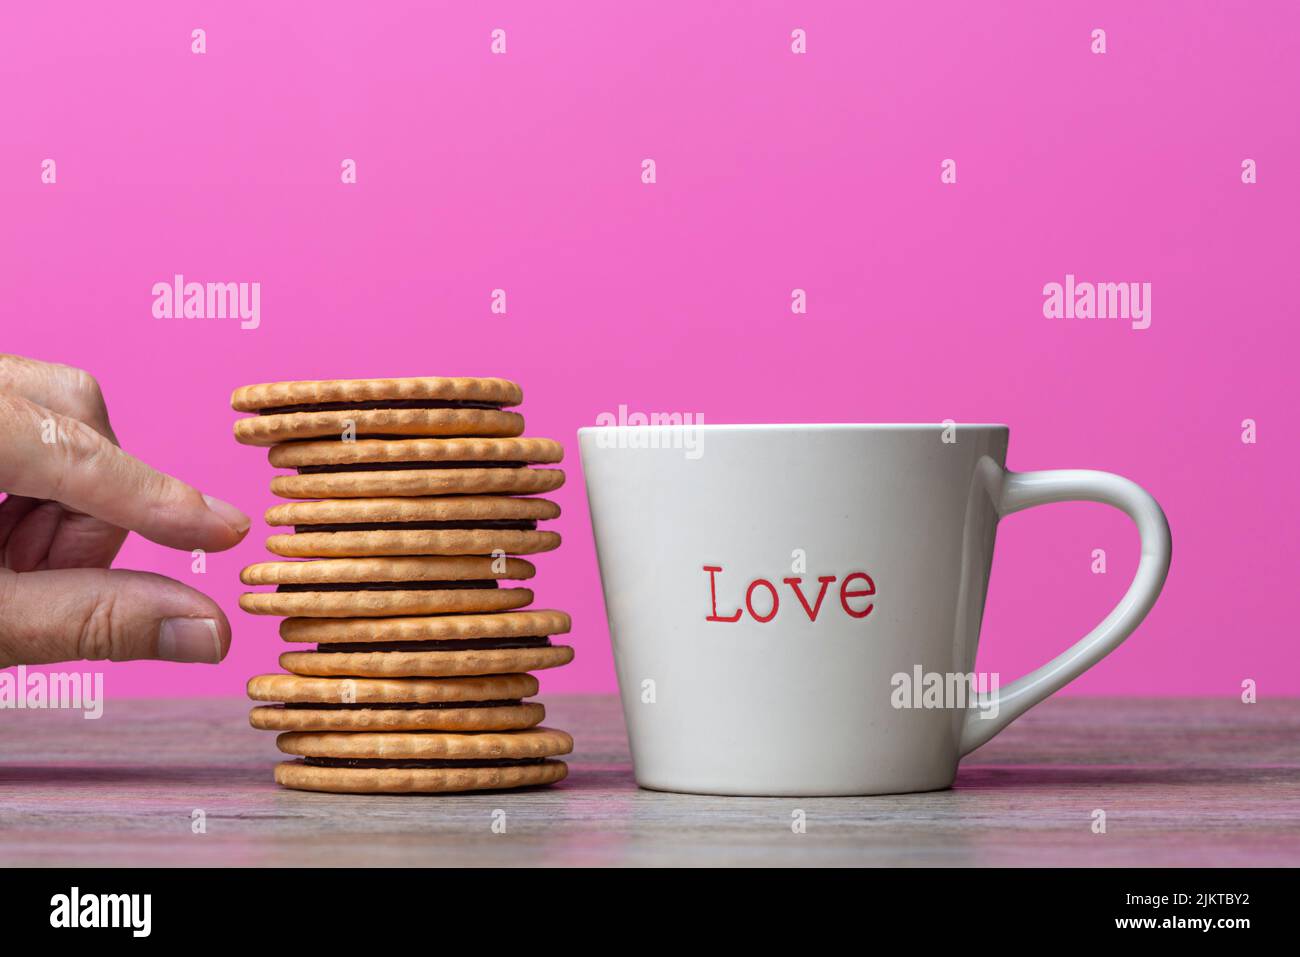 Hand taking a biscuit from a stack next to a mug with 'love' written on it. Stock Photo